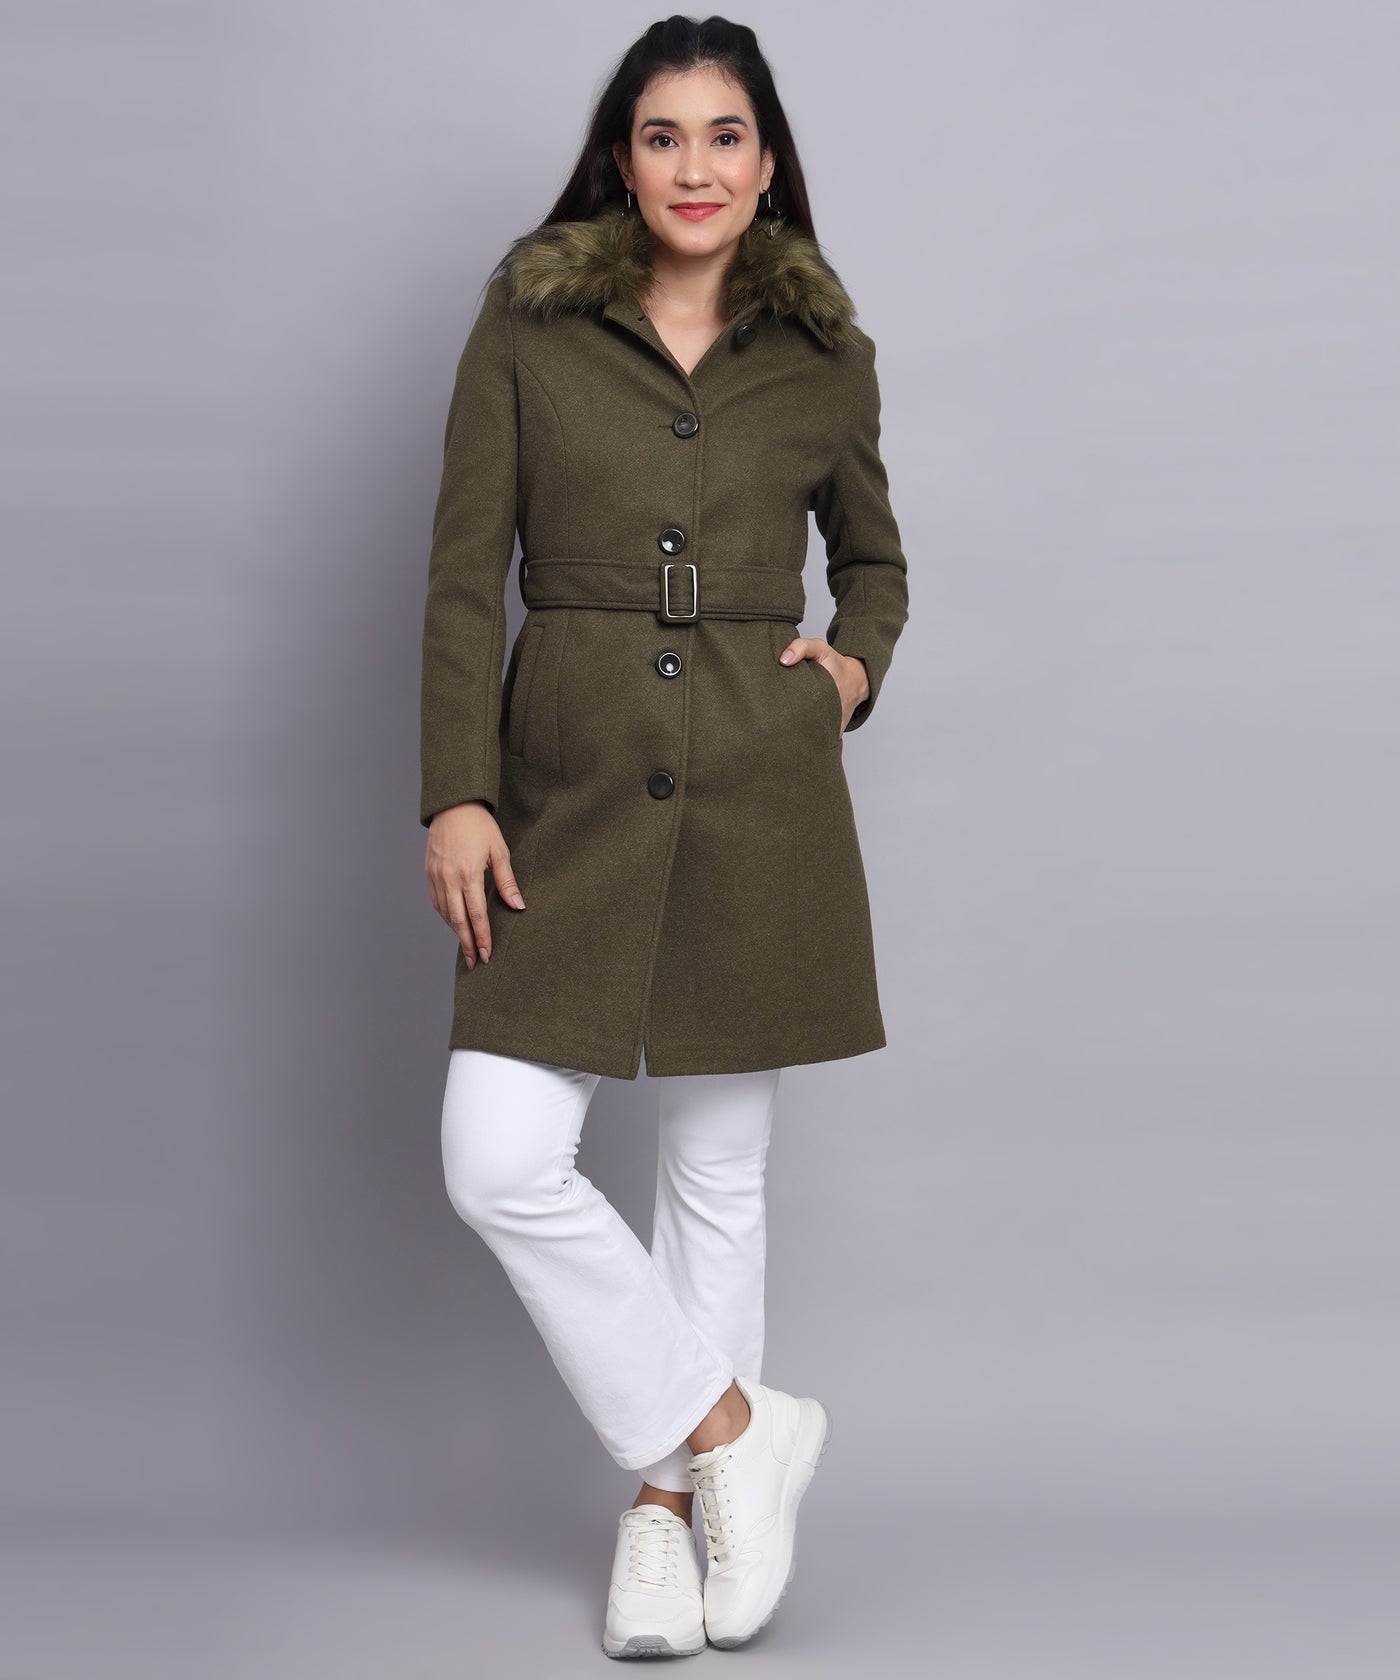 AW6228-OLIVE